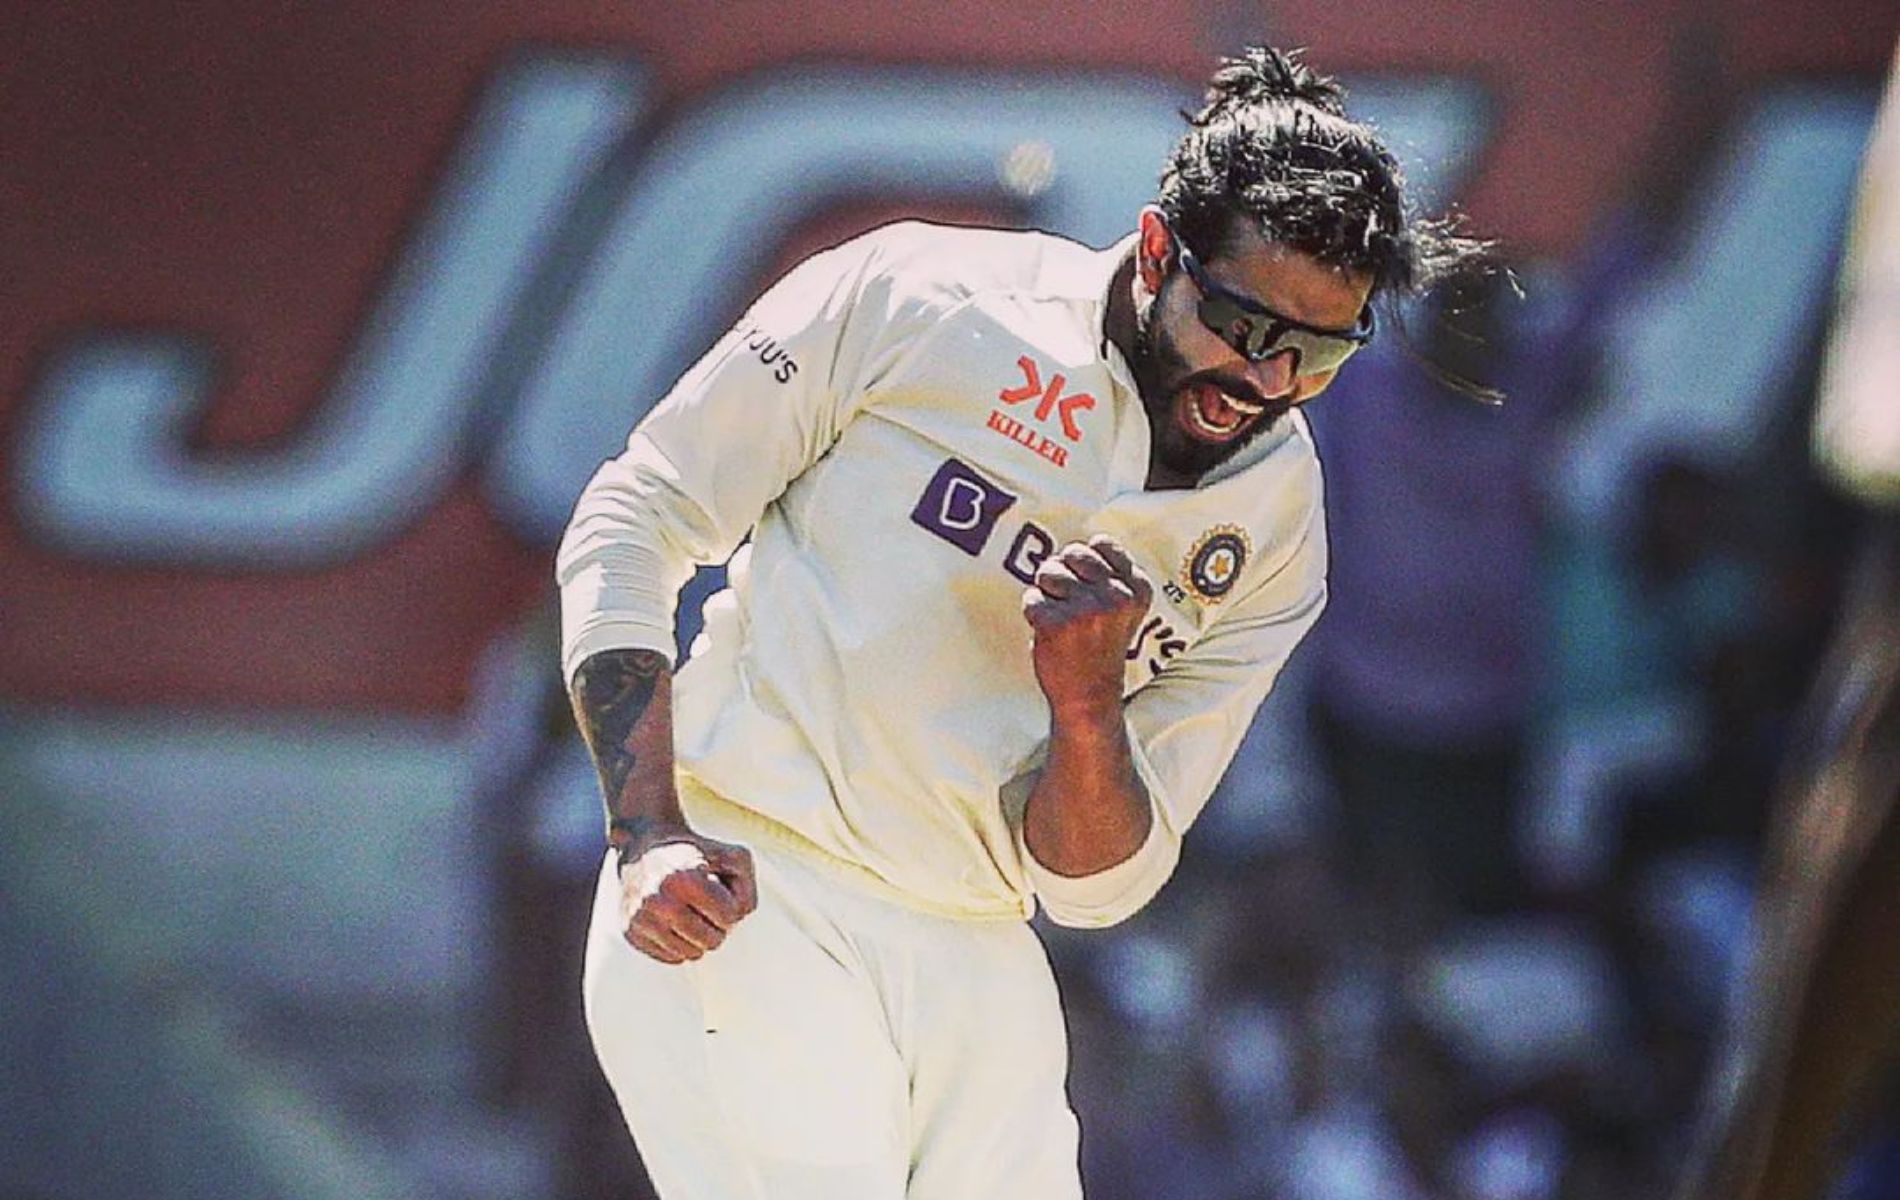 Ravindra Jadeja was the pick of the Indian bowlers on Day 1. (Pic: Twitter)